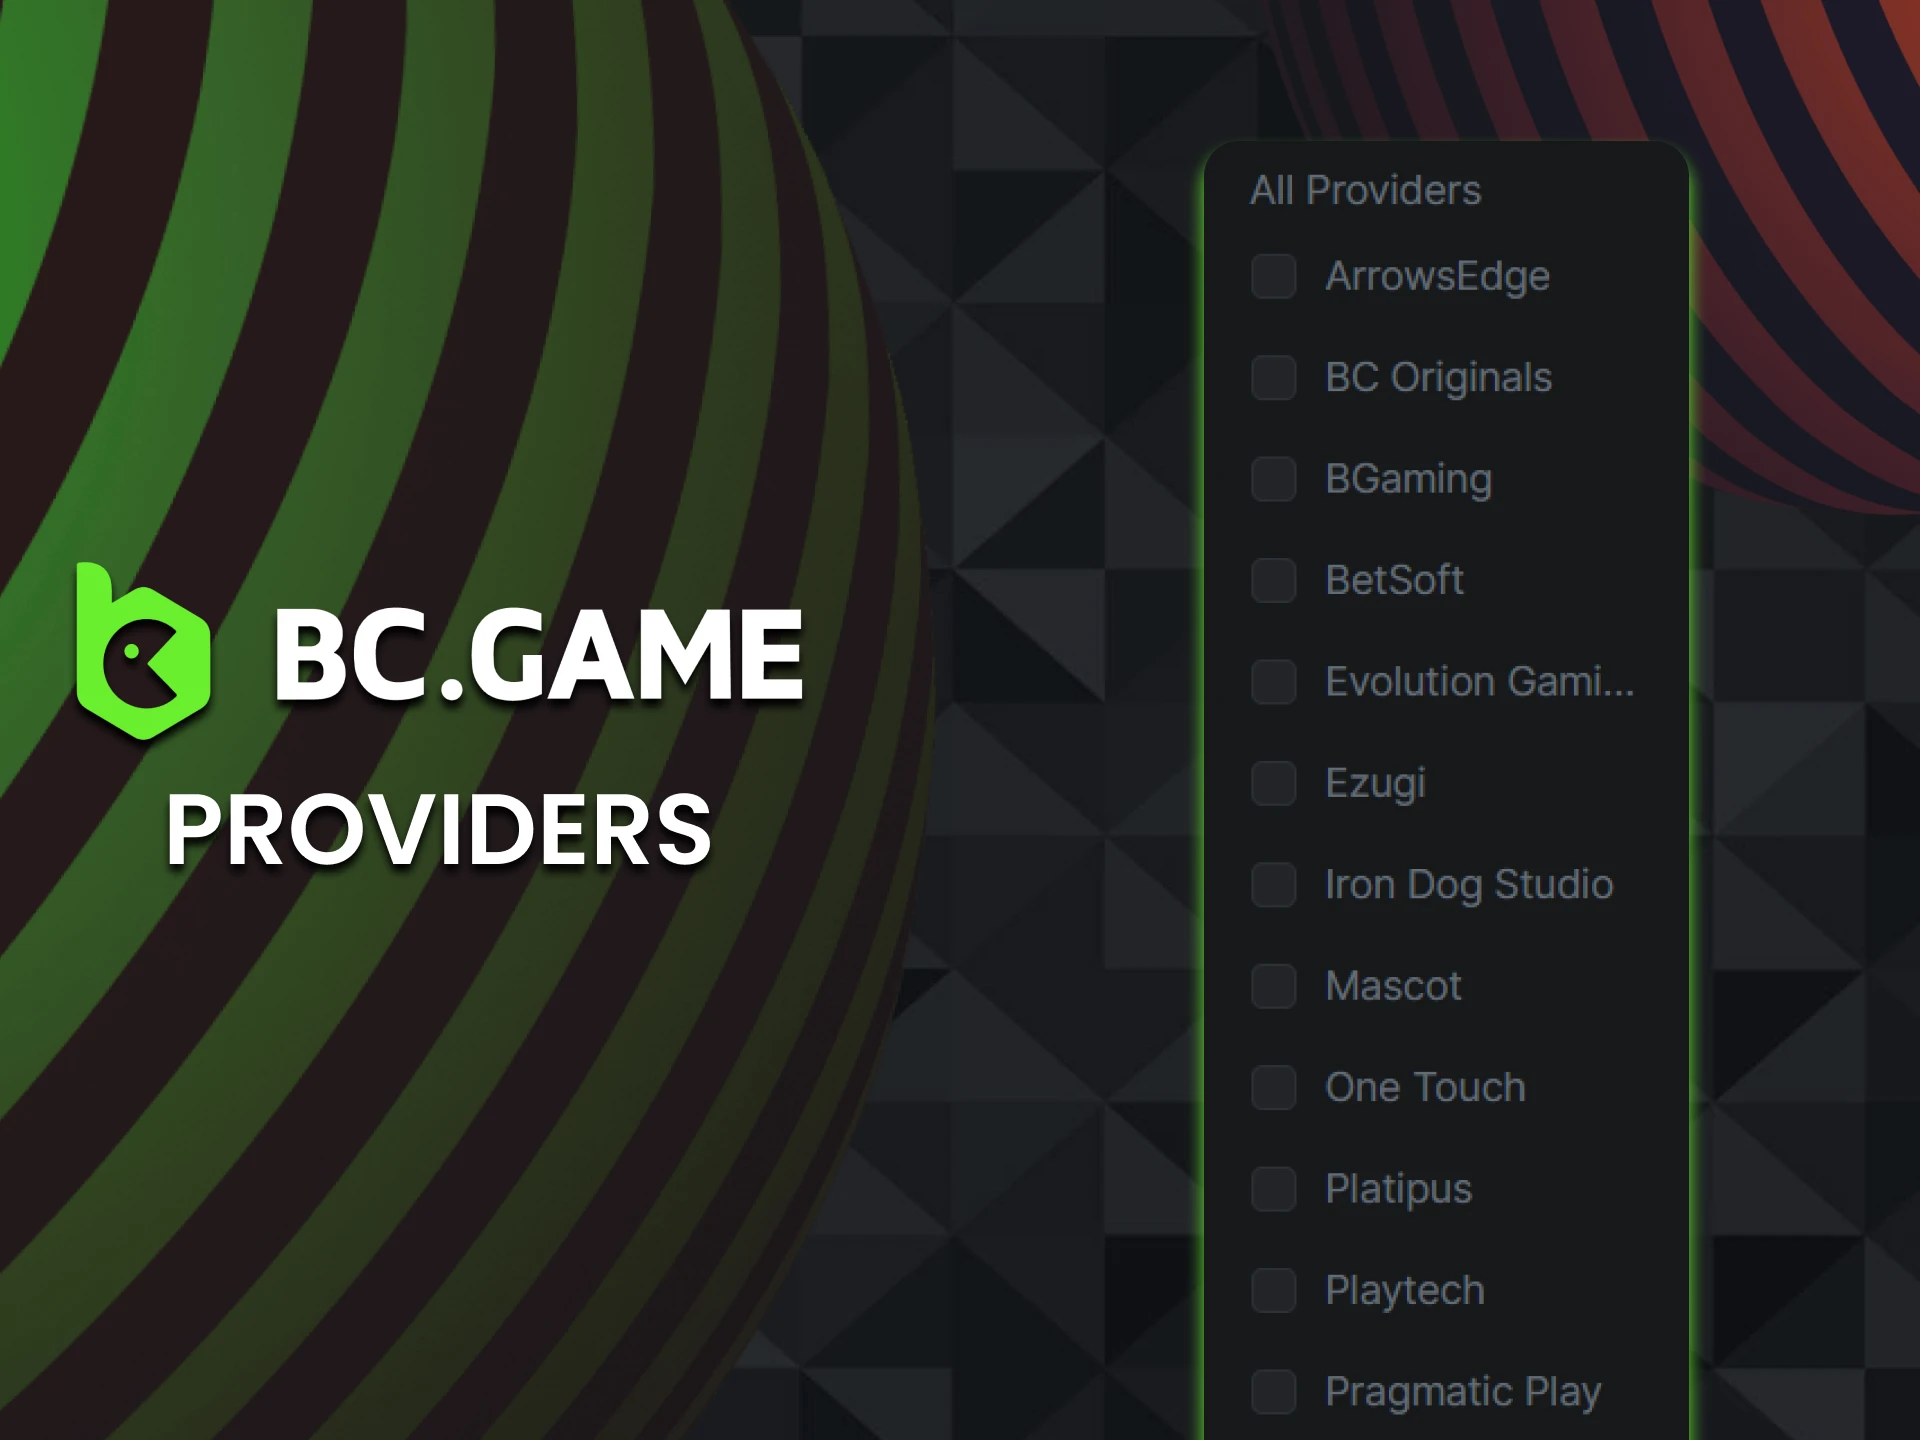 Find out which blackjack providers are available at BC Games.